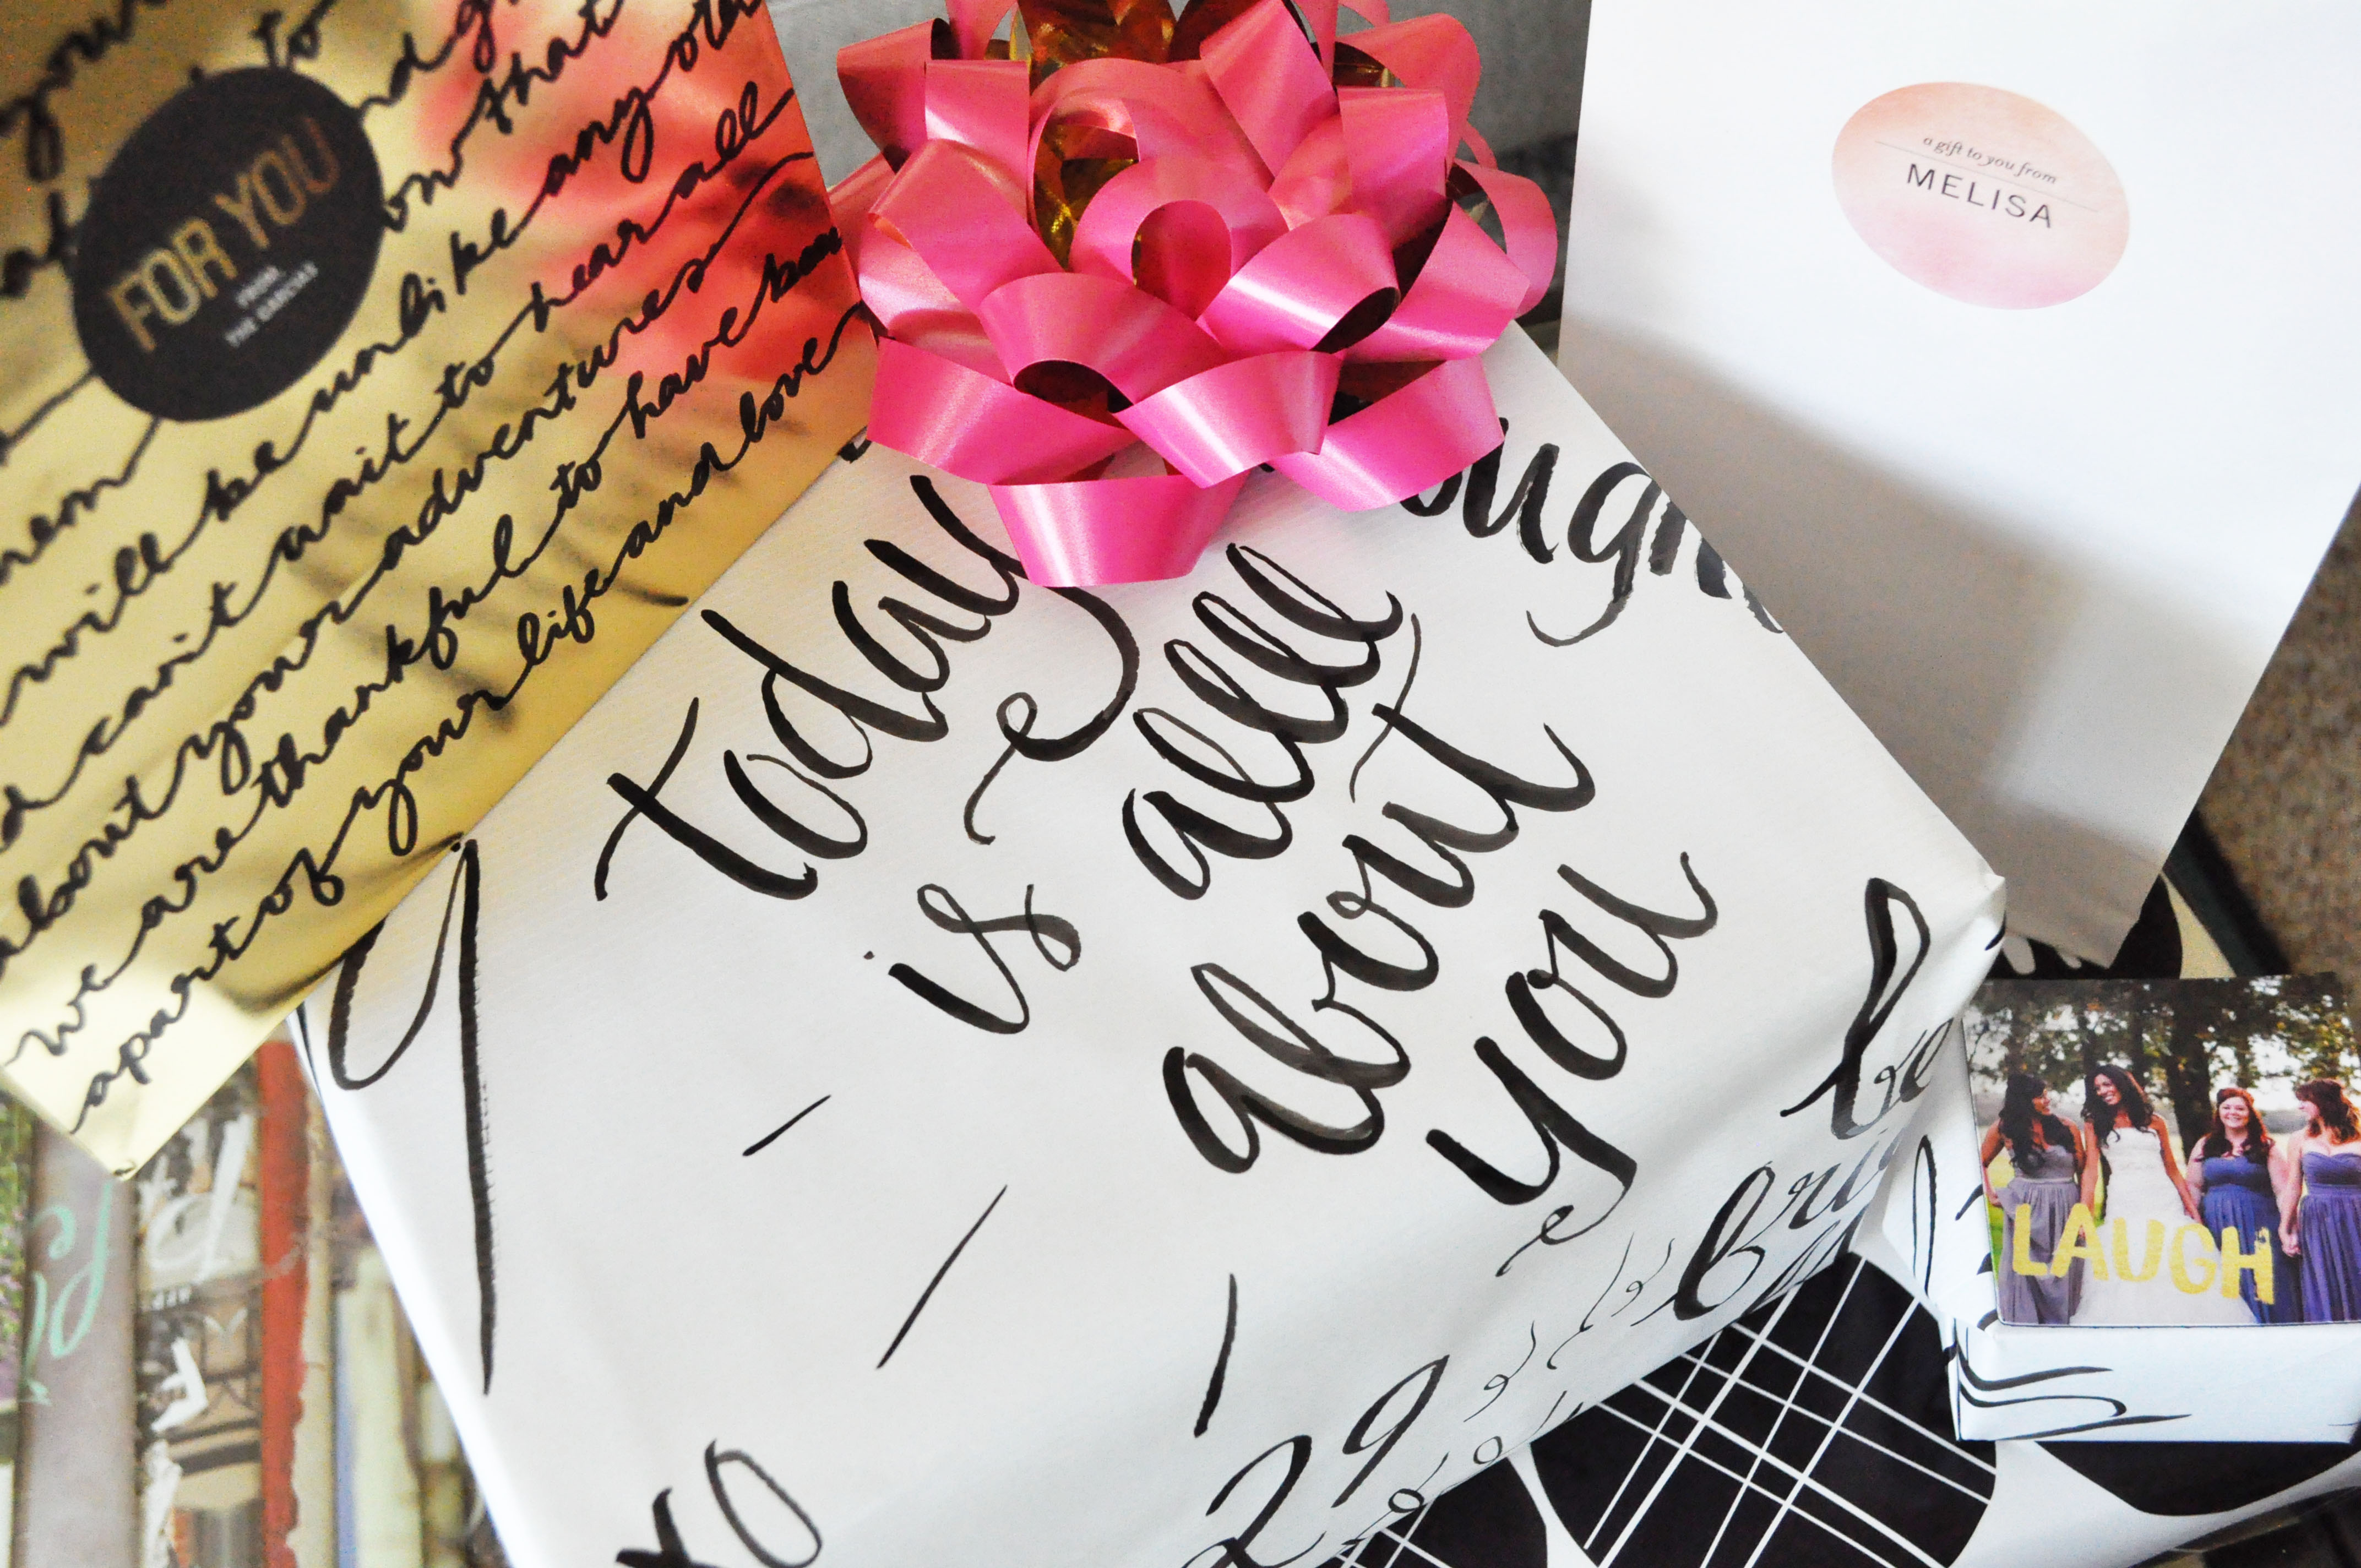 10 Reasons To Learn Modern Calligraphy And Gift Wrapping  + Contest Alert